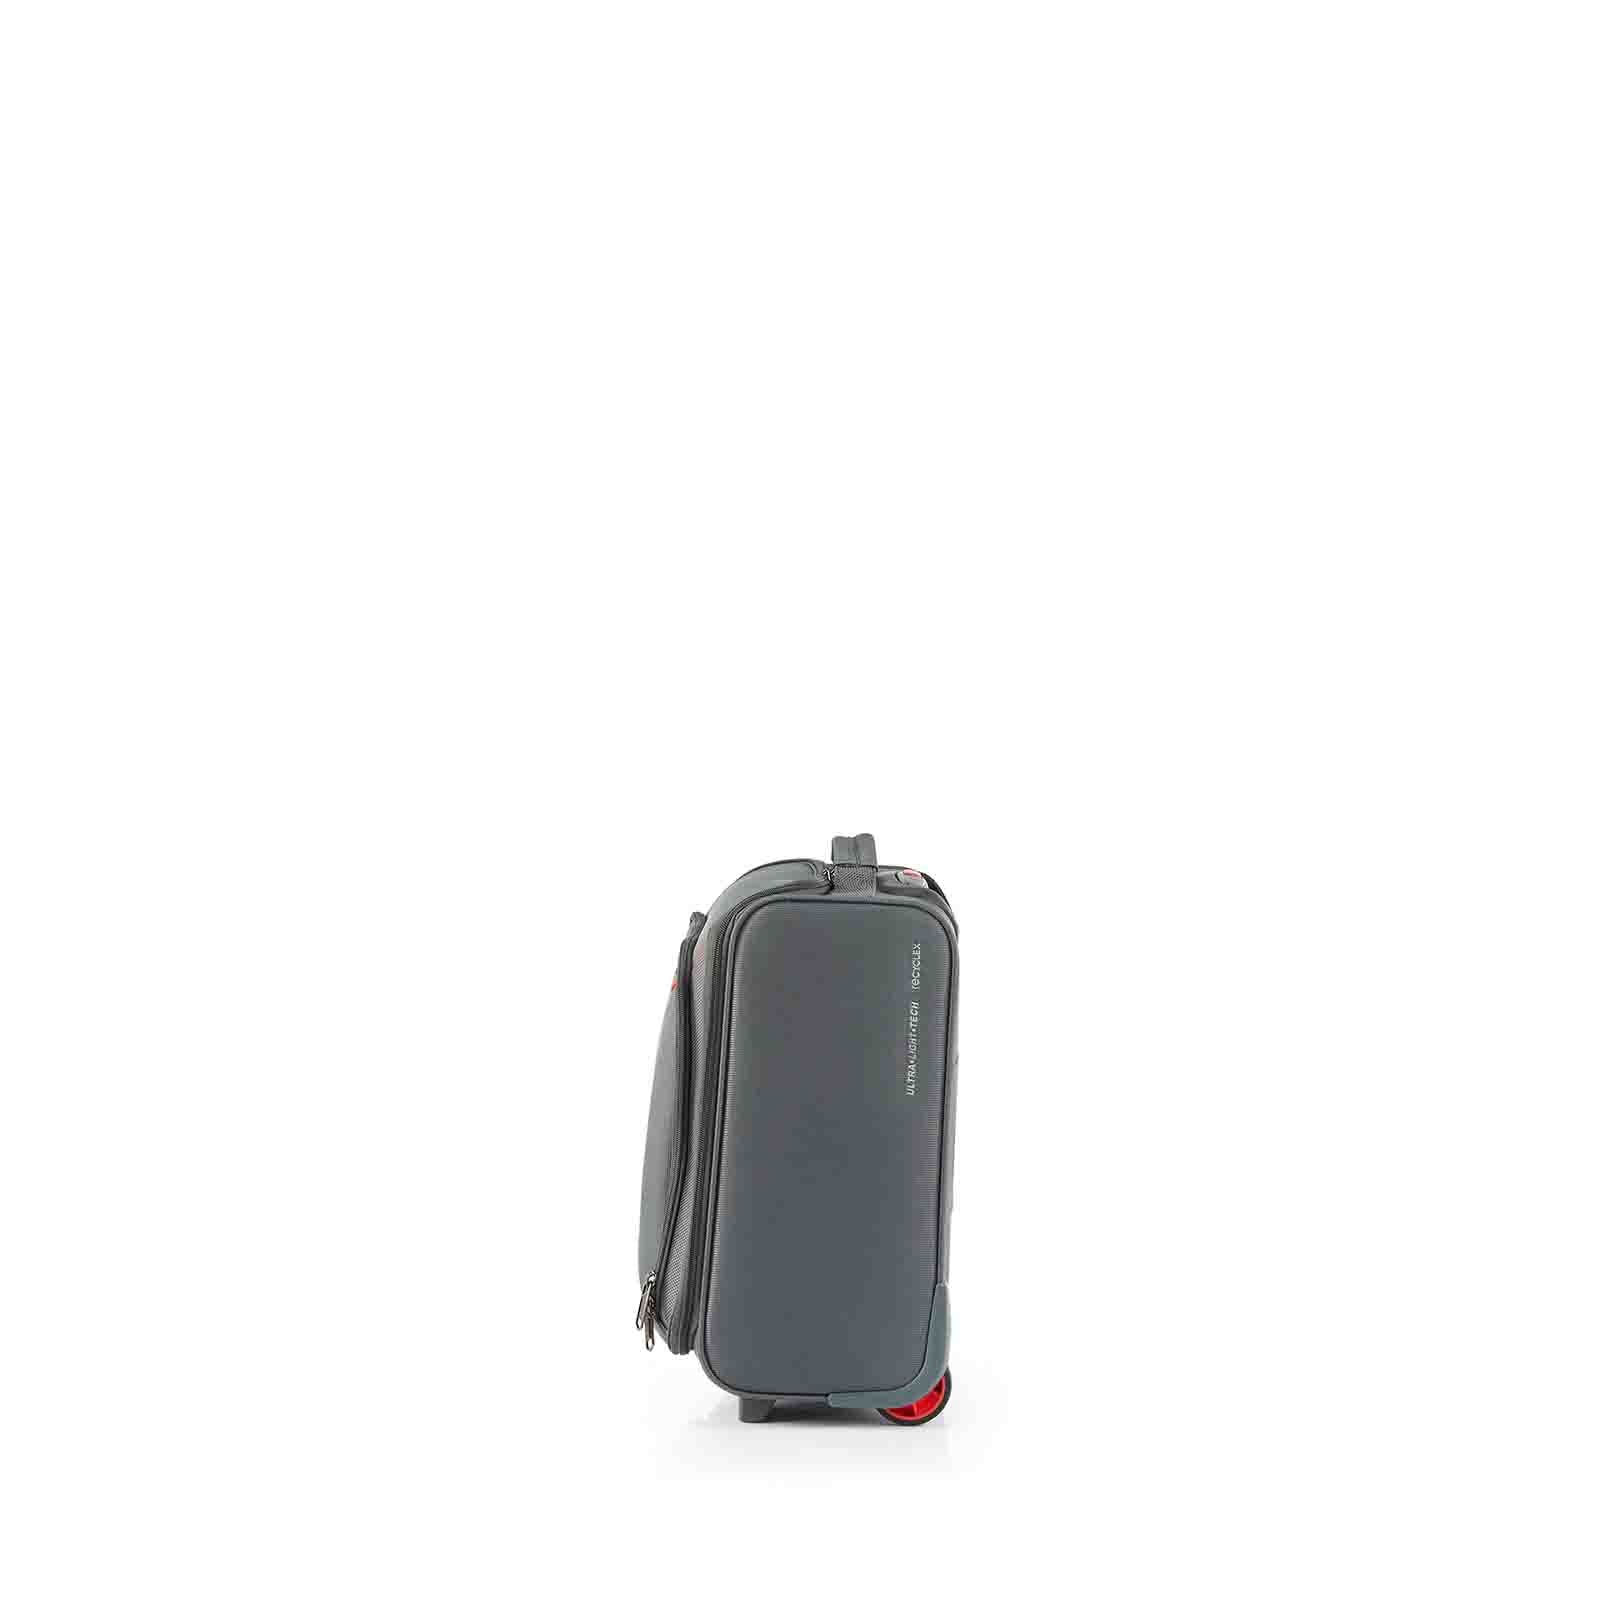 American-Tourister-Applite-4-Eco-Underseater-Suitcase-Grey-Red-Side-RH